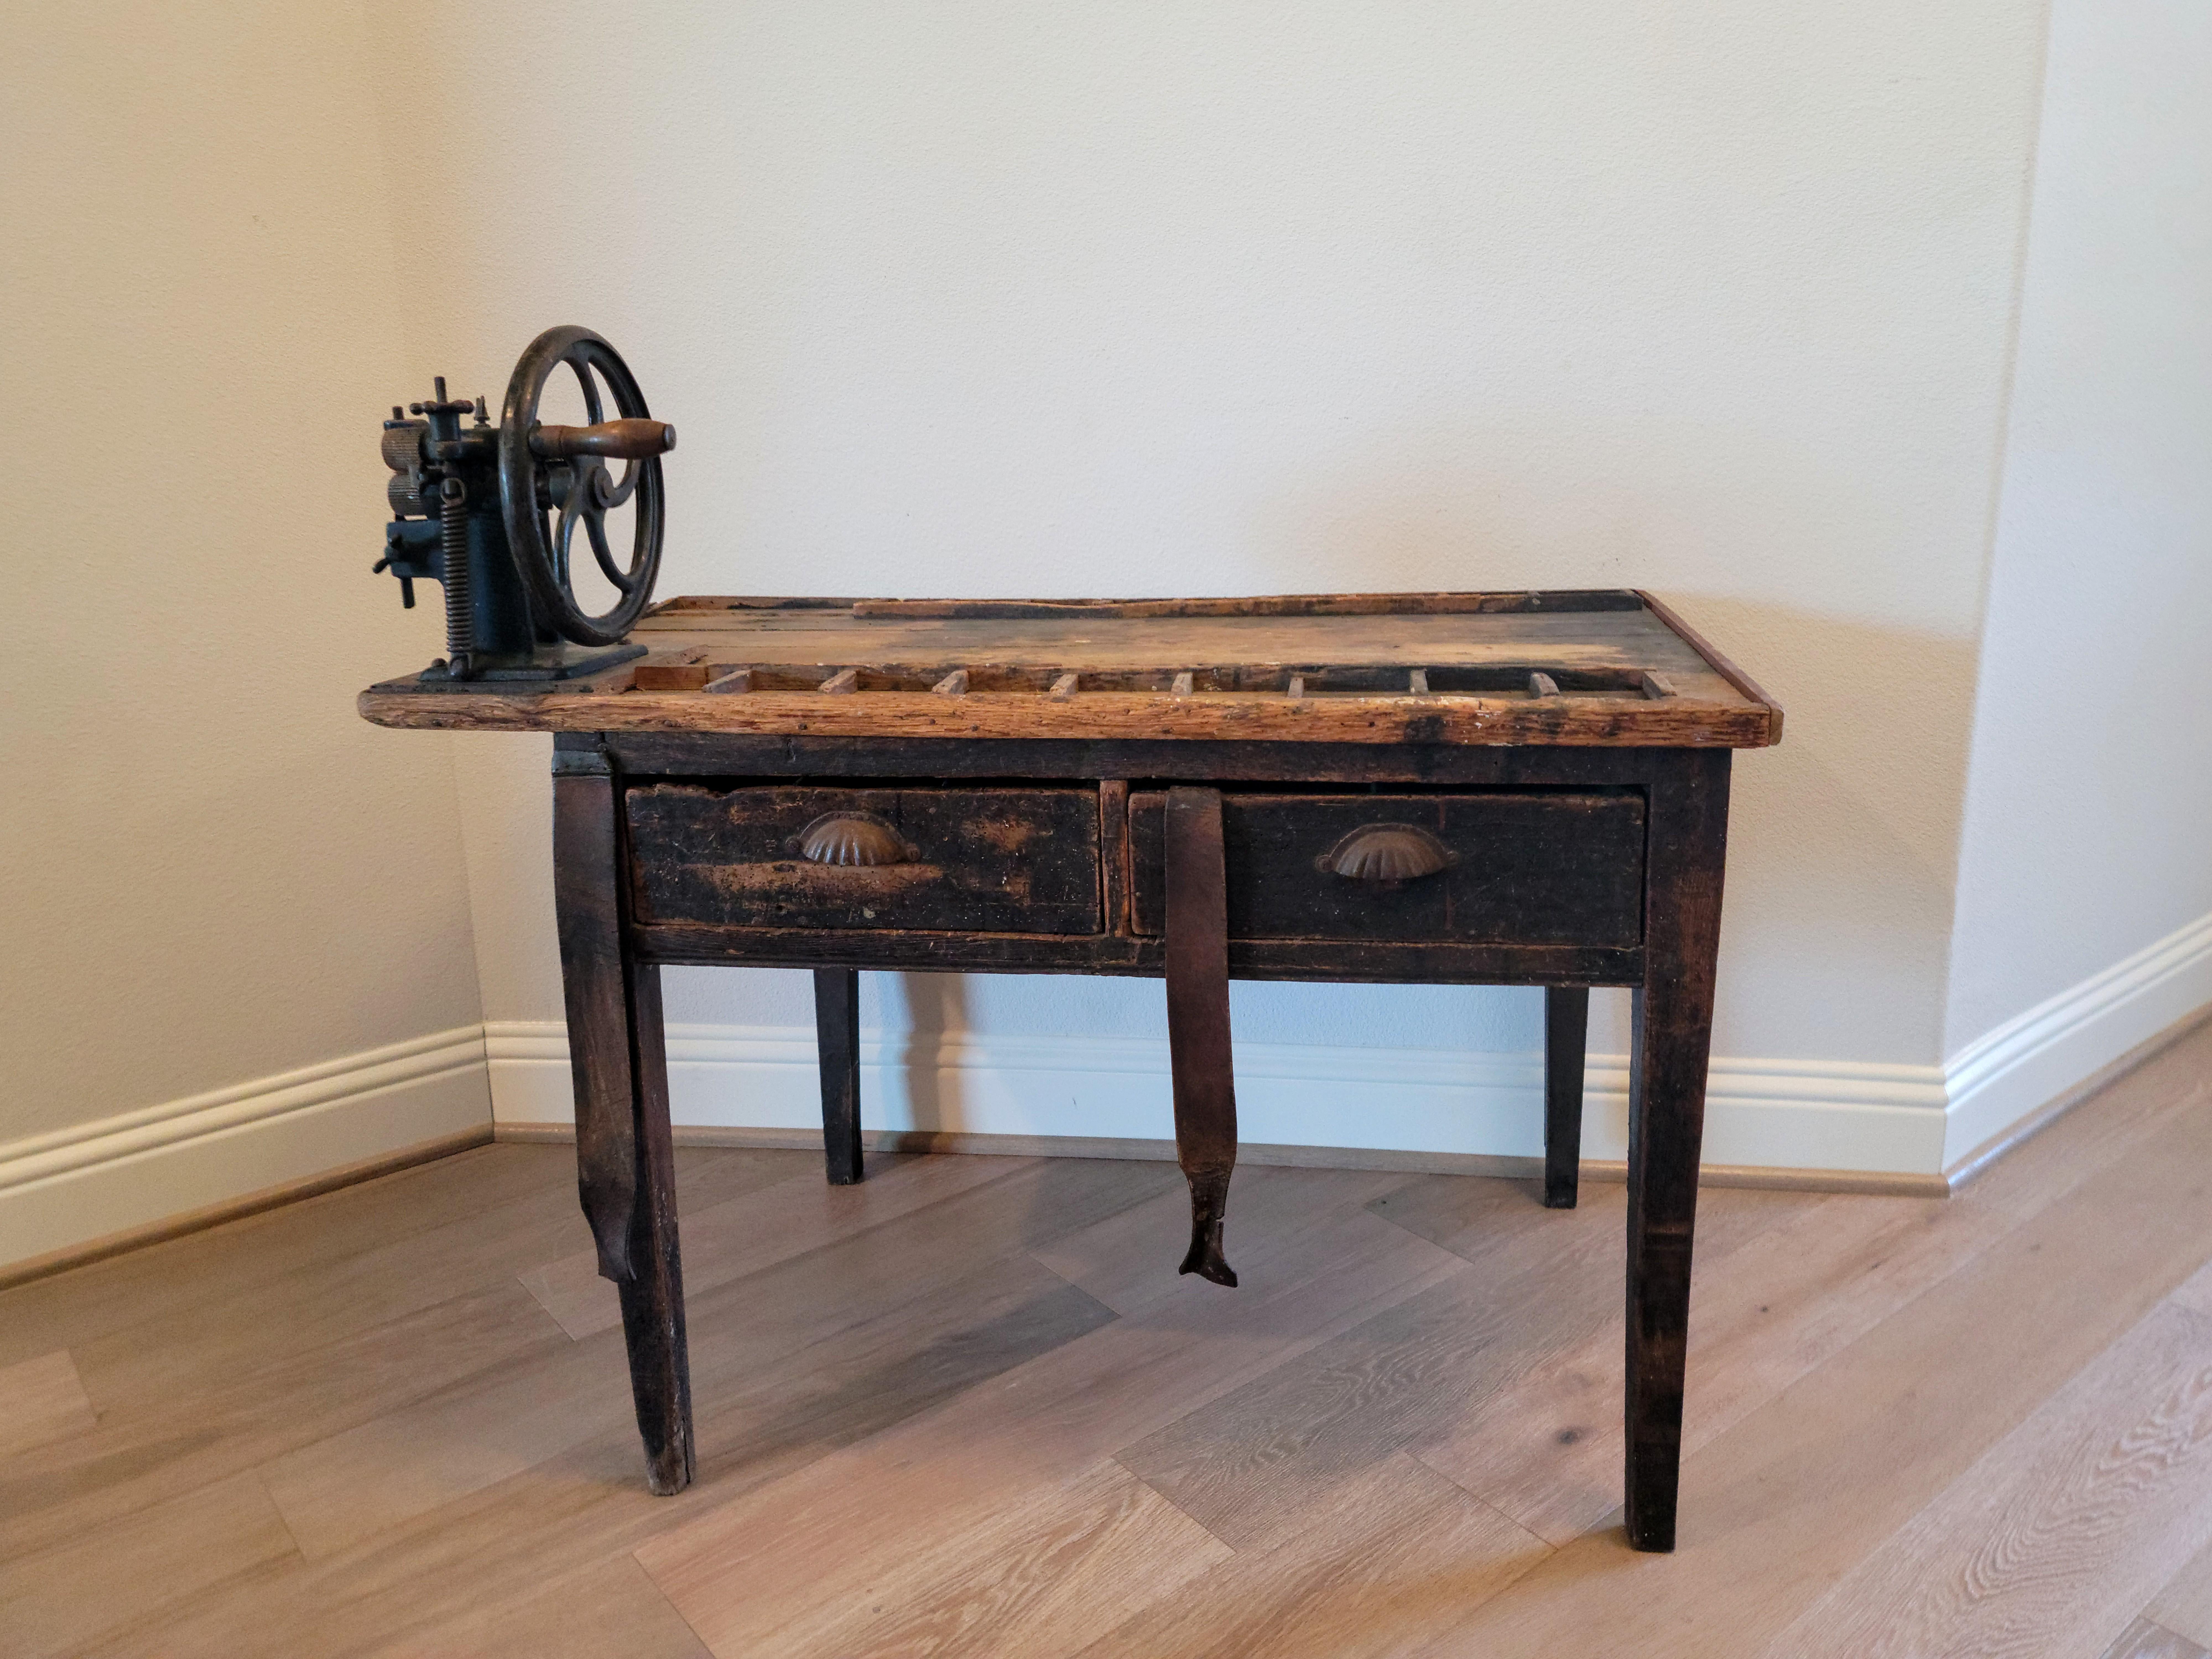 A scarce French cobblers / leatherwork shop workbench with beautifully worn distressed patina!

Dating to the turn of the late 19th / early 20th century, featuring a rectangular plank boarded top, slightly overhung on the left and mounted with a